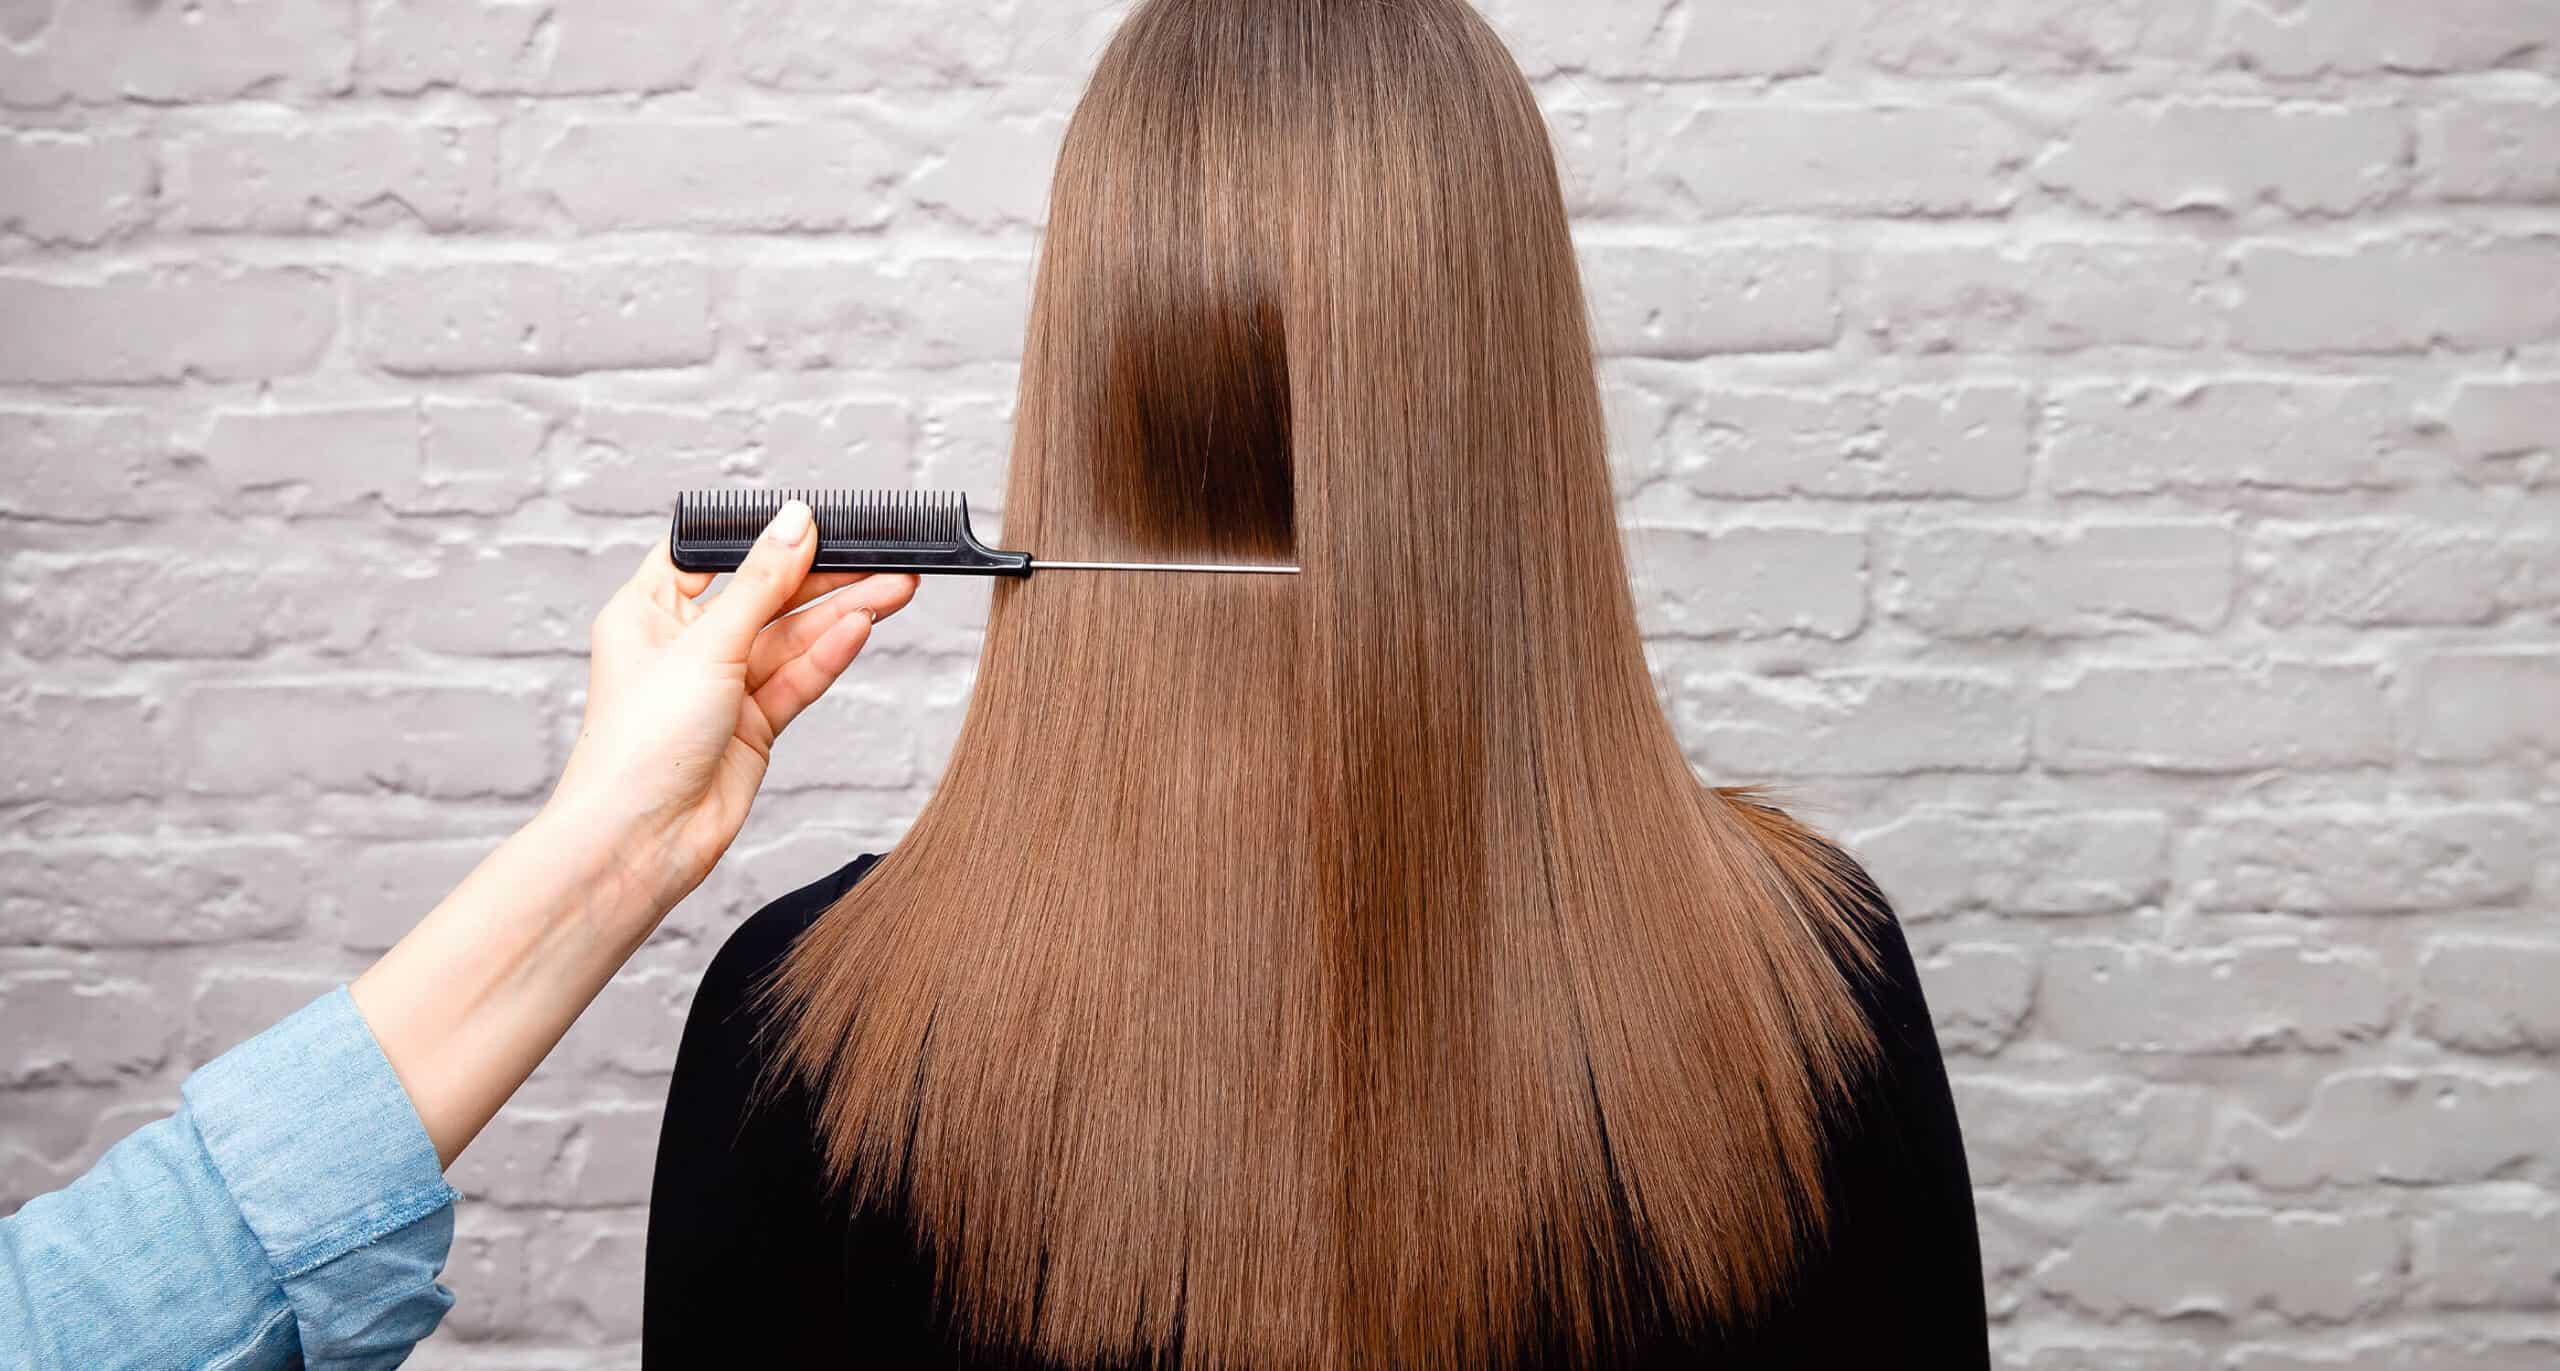 back of person's straight and long brunette hair, hand holding a comb against the hair